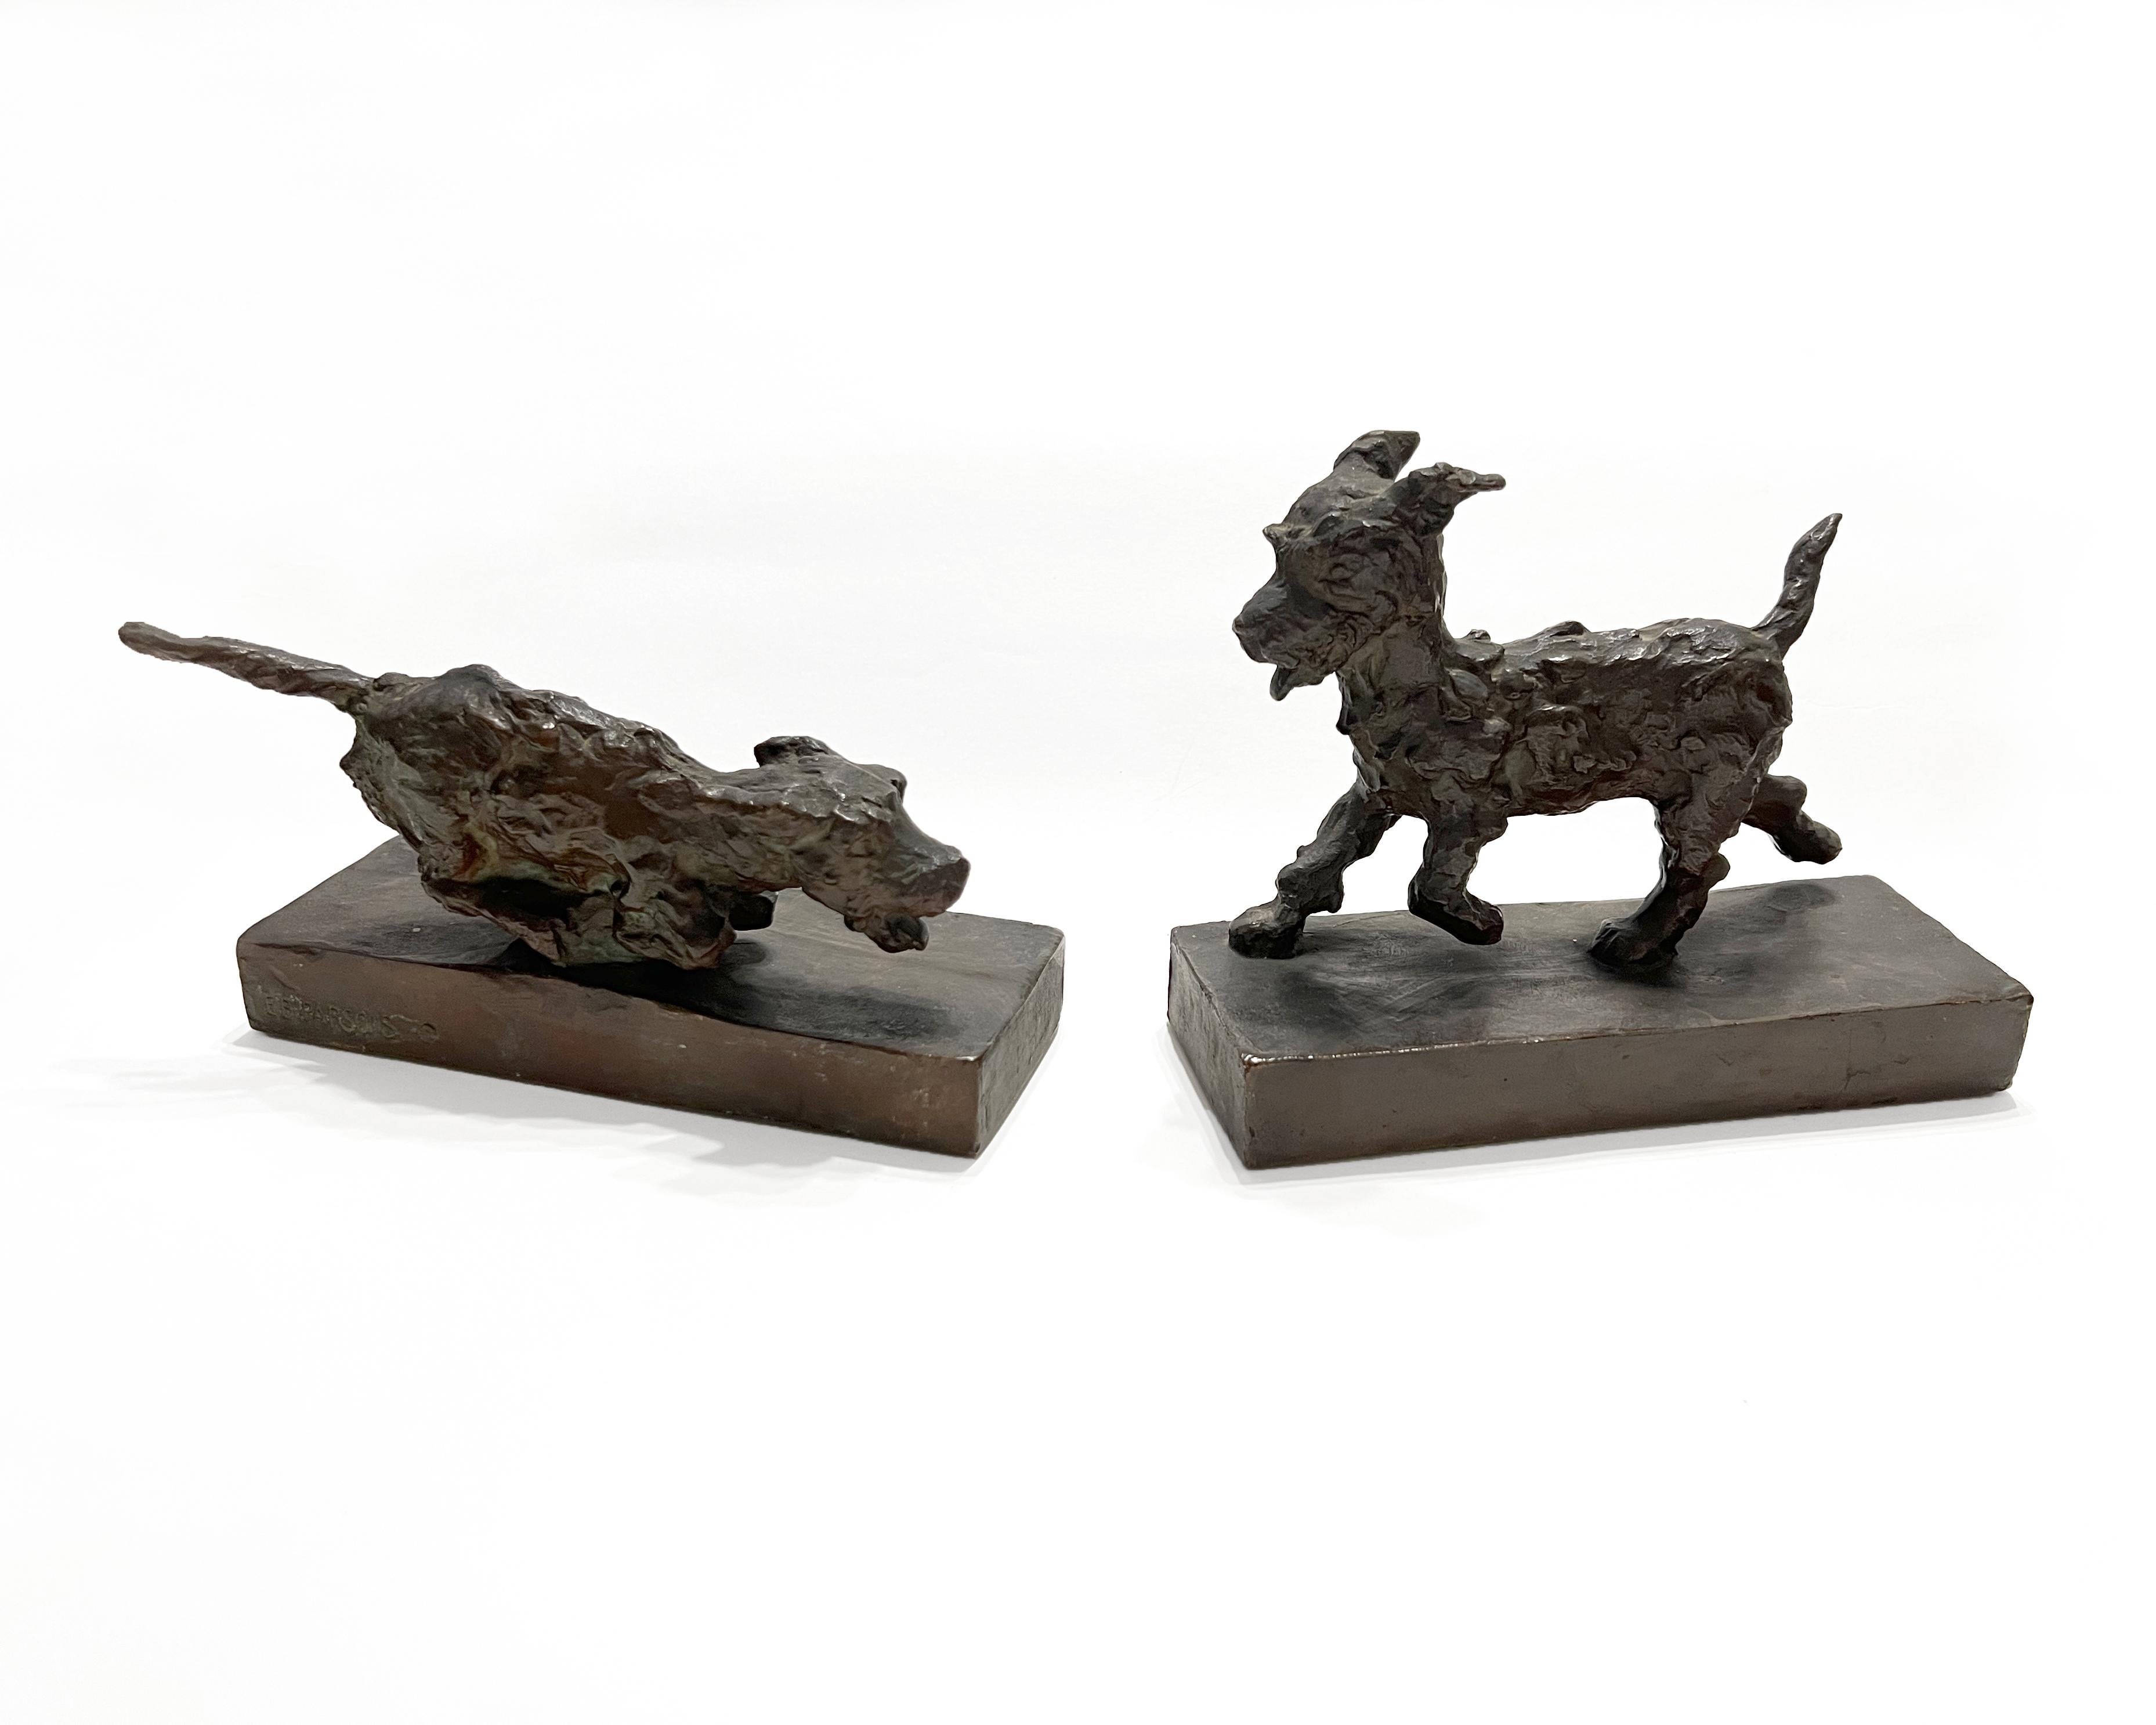 Edith Barretto Stevens Parsons Figurative Sculpture - Walking Terrier and Running Terrier: A Pair of Bookends